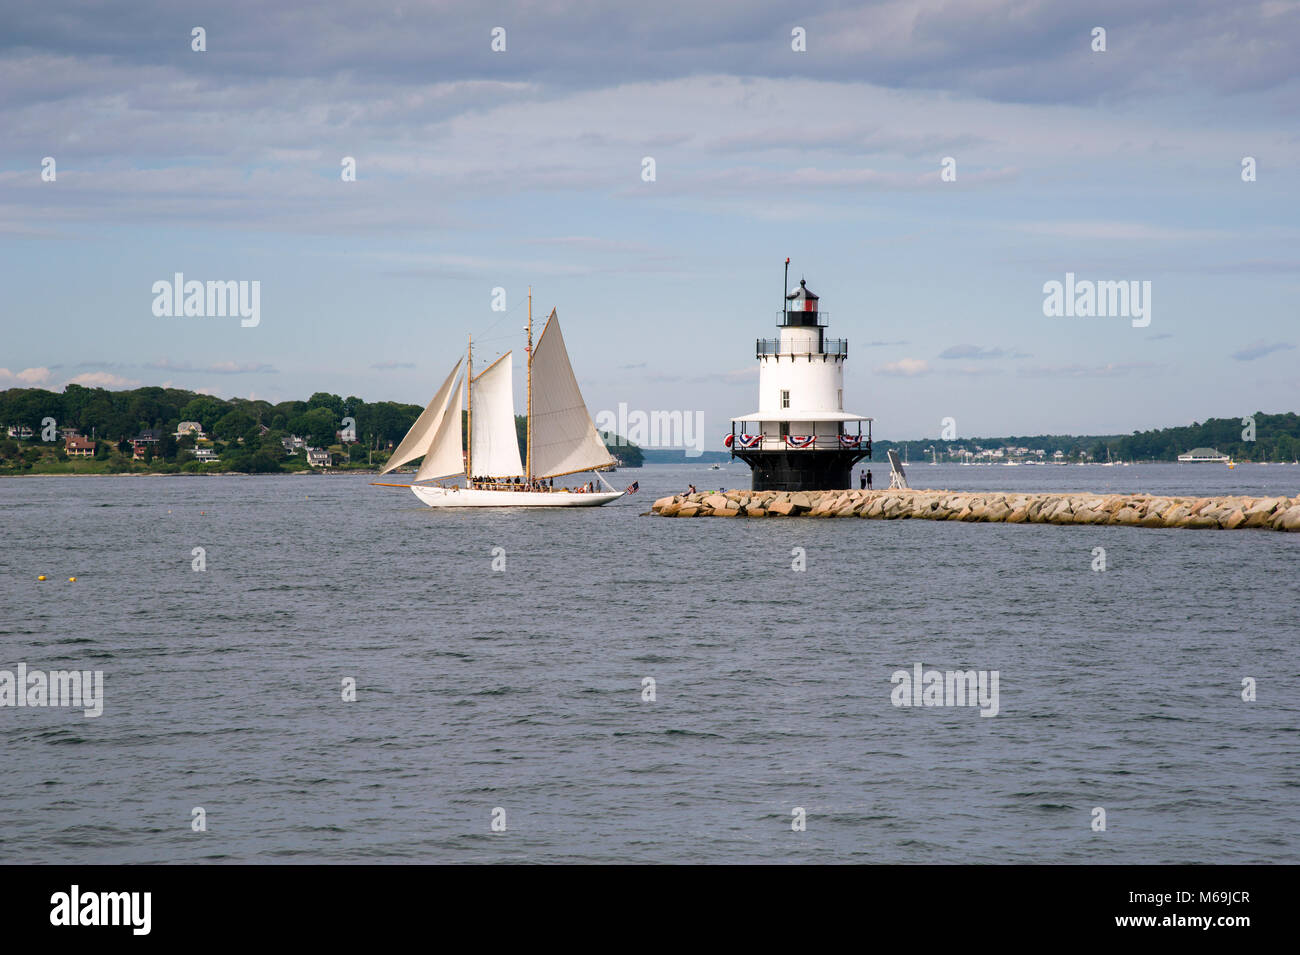 An authentic schooner, referred to as a windjammer, sails past Spring Point Lighthouse in Portland, Maine. Stock Photo